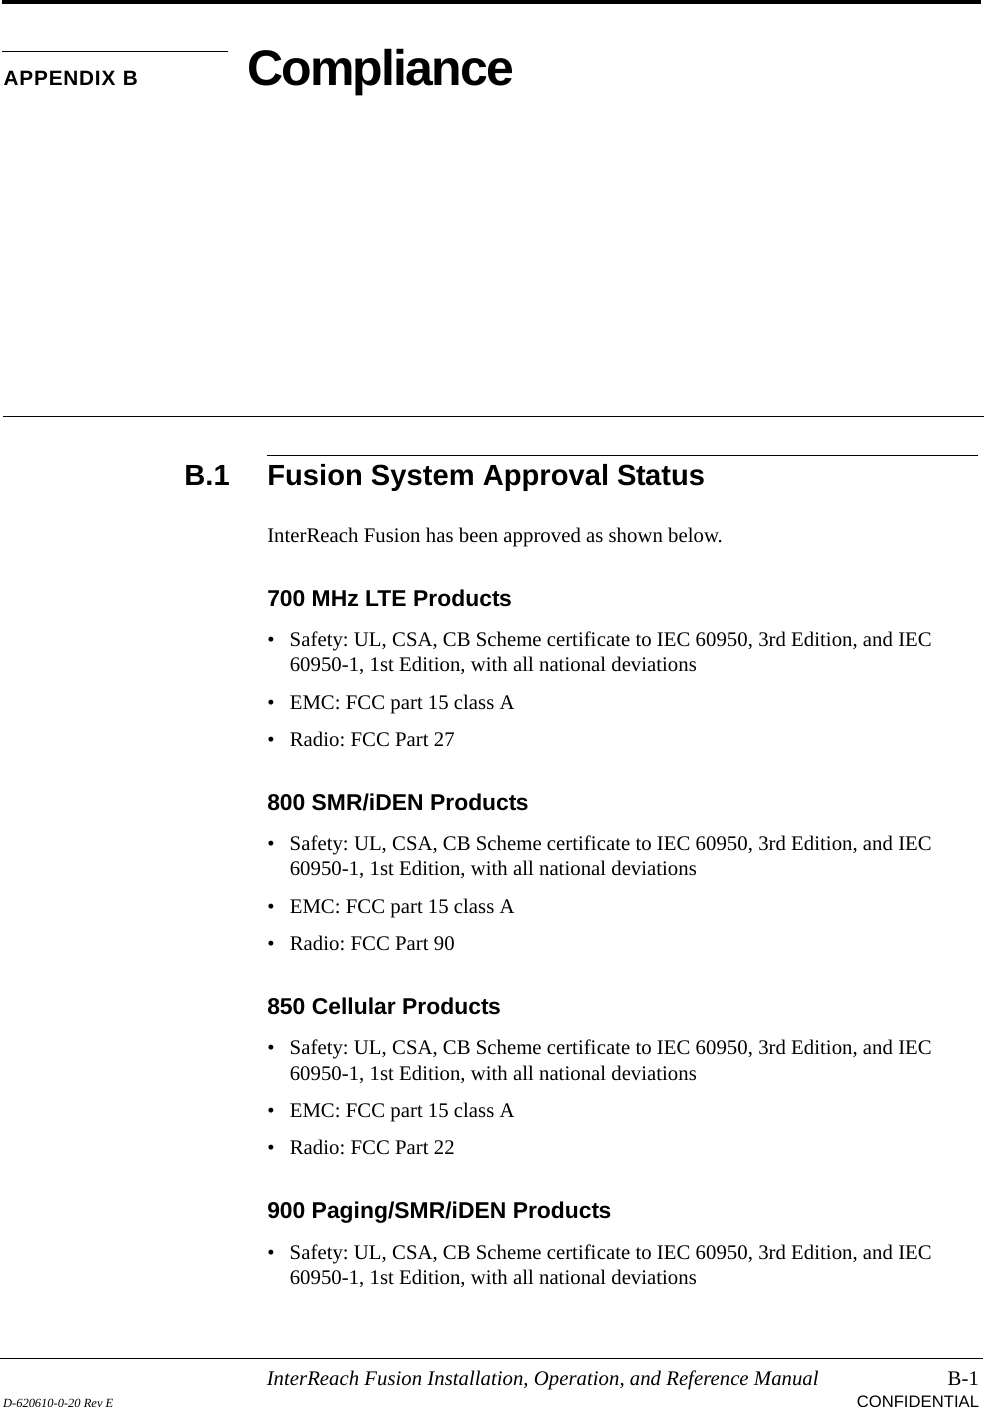 InterReach Fusion Installation, Operation, and Reference Manual B-1D-620610-0-20 Rev E CONFIDENTIALAPPENDIX B ComplianceB.1 Fusion System Approval StatusInterReach Fusion has been approved as shown below.700 MHz LTE Products• Safety: UL, CSA, CB Scheme certificate to IEC 60950, 3rd Edition, and IEC 60950-1, 1st Edition, with all national deviations• EMC: FCC part 15 class A• Radio: FCC Part 27800 SMR/iDEN Products• Safety: UL, CSA, CB Scheme certificate to IEC 60950, 3rd Edition, and IEC 60950-1, 1st Edition, with all national deviations• EMC: FCC part 15 class A• Radio: FCC Part 90850 Cellular Products• Safety: UL, CSA, CB Scheme certificate to IEC 60950, 3rd Edition, and IEC 60950-1, 1st Edition, with all national deviations• EMC: FCC part 15 class A• Radio: FCC Part 22900 Paging/SMR/iDEN Products• Safety: UL, CSA, CB Scheme certificate to IEC 60950, 3rd Edition, and IEC 60950-1, 1st Edition, with all national deviations